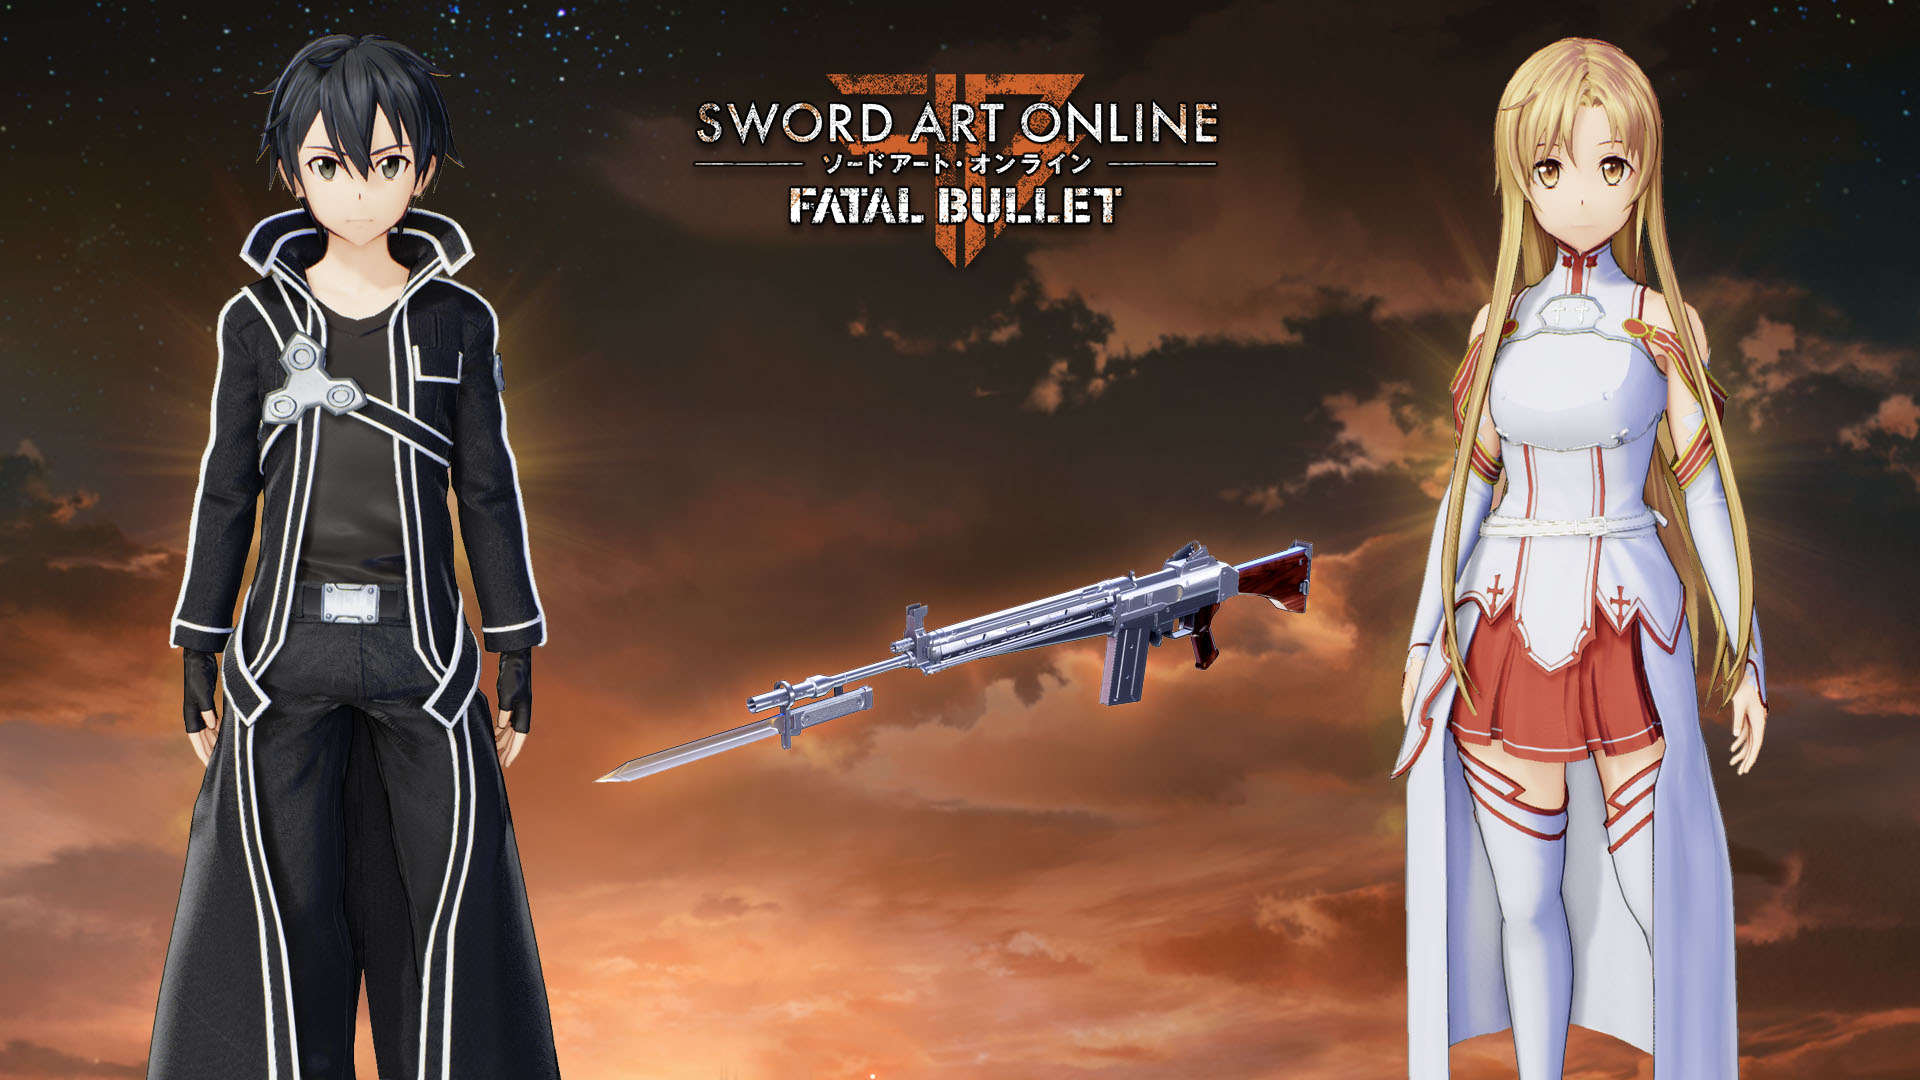 Sword Art Online Variant Showdown - New SAO mobile game announced - MMO  Culture